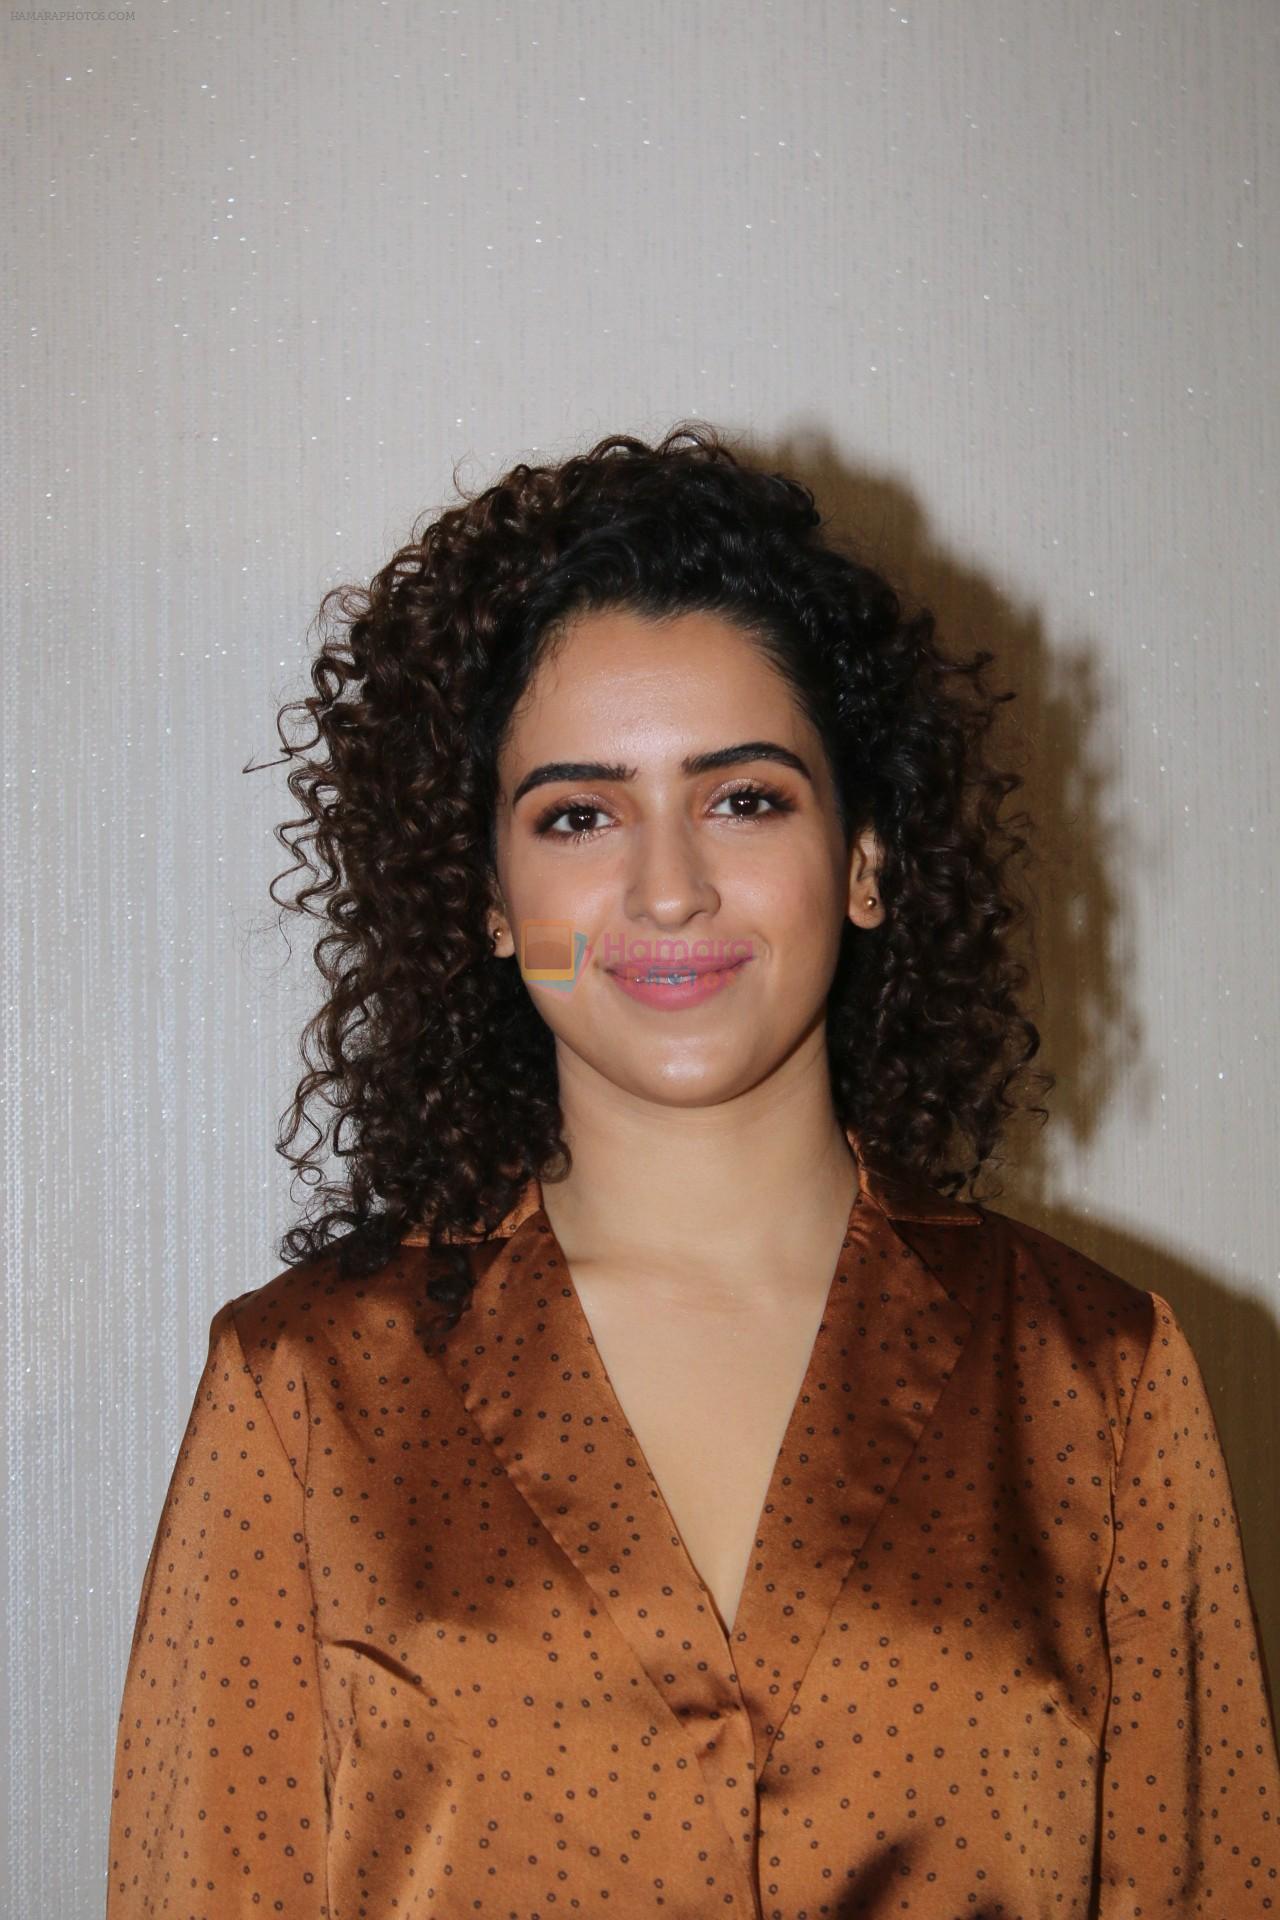 Sanya Malhotra at the trailer launch of their film Photograph at The View in andheri on 19th Feb 2019